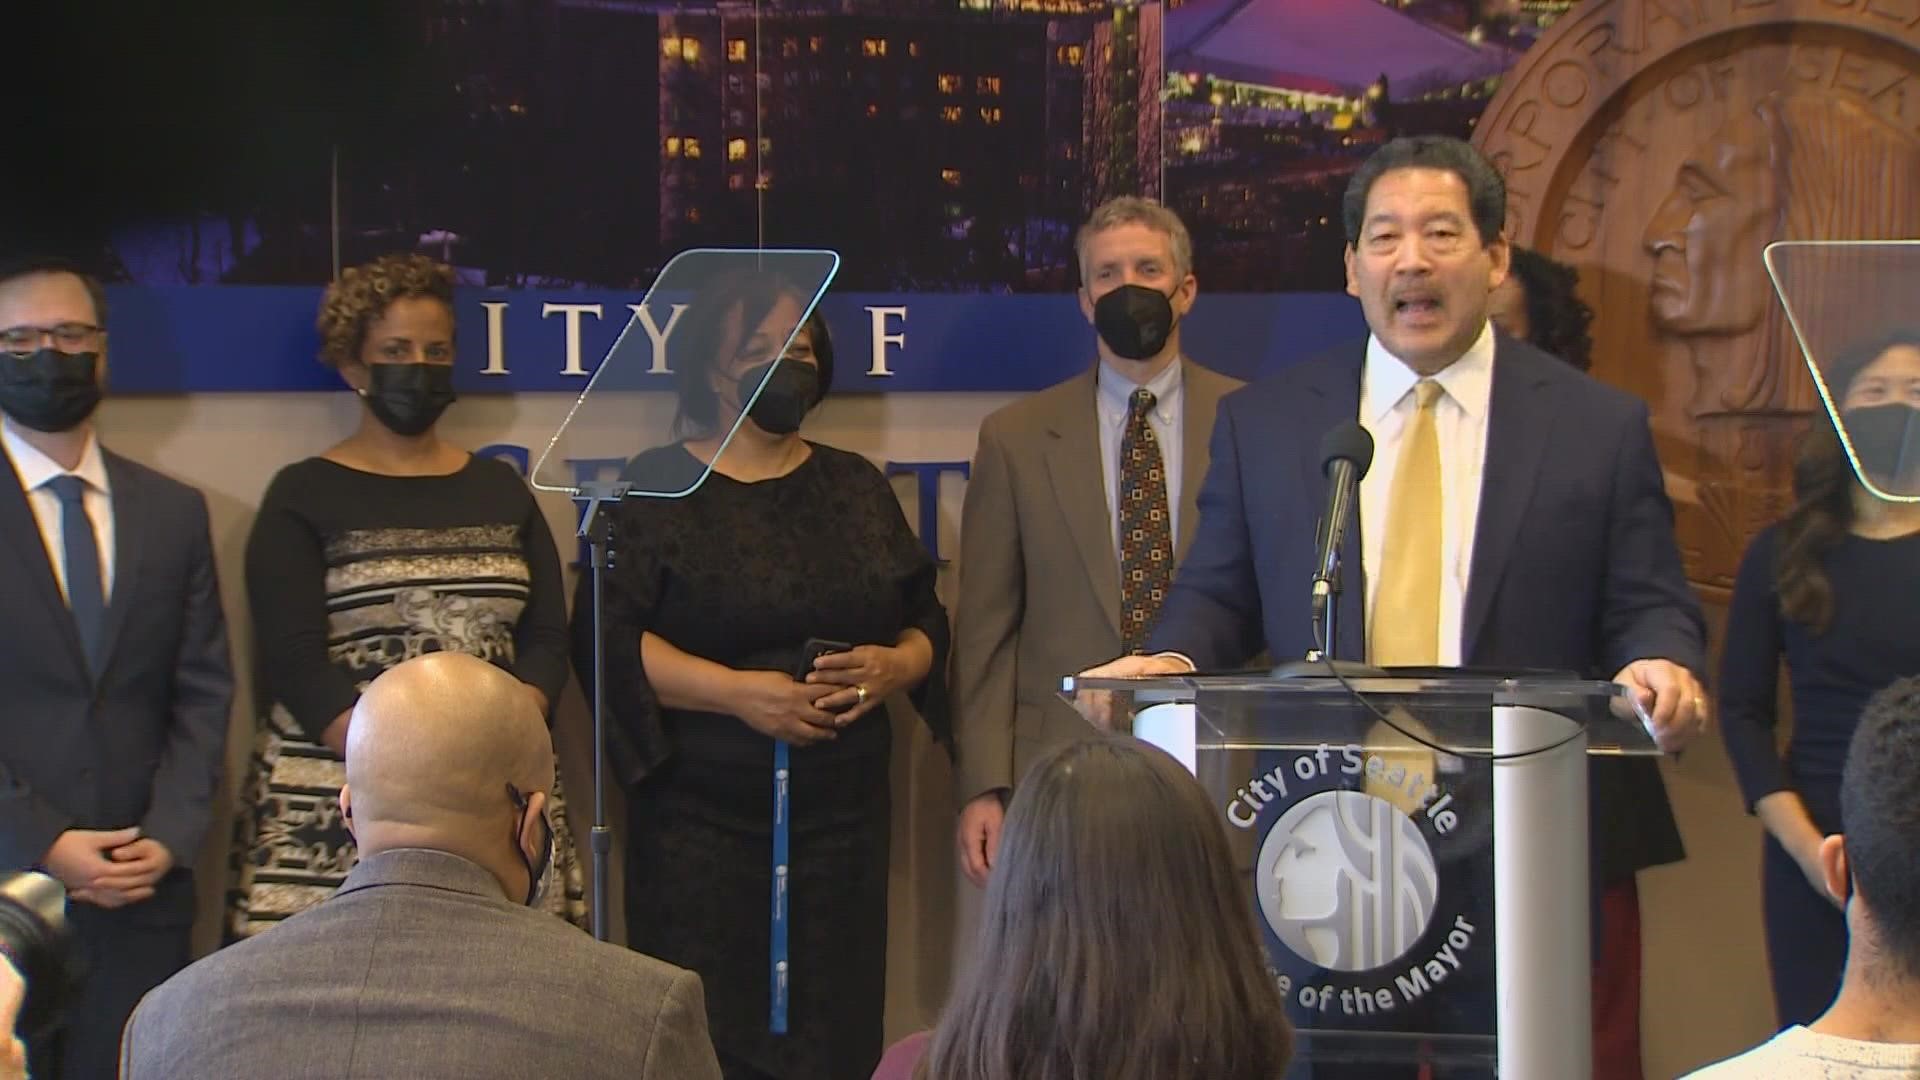 Bruce Harrell decided to forgo a large public inauguration due to rising COVID-19 cases and instead addressed Seattleites "about his vision for a united city."